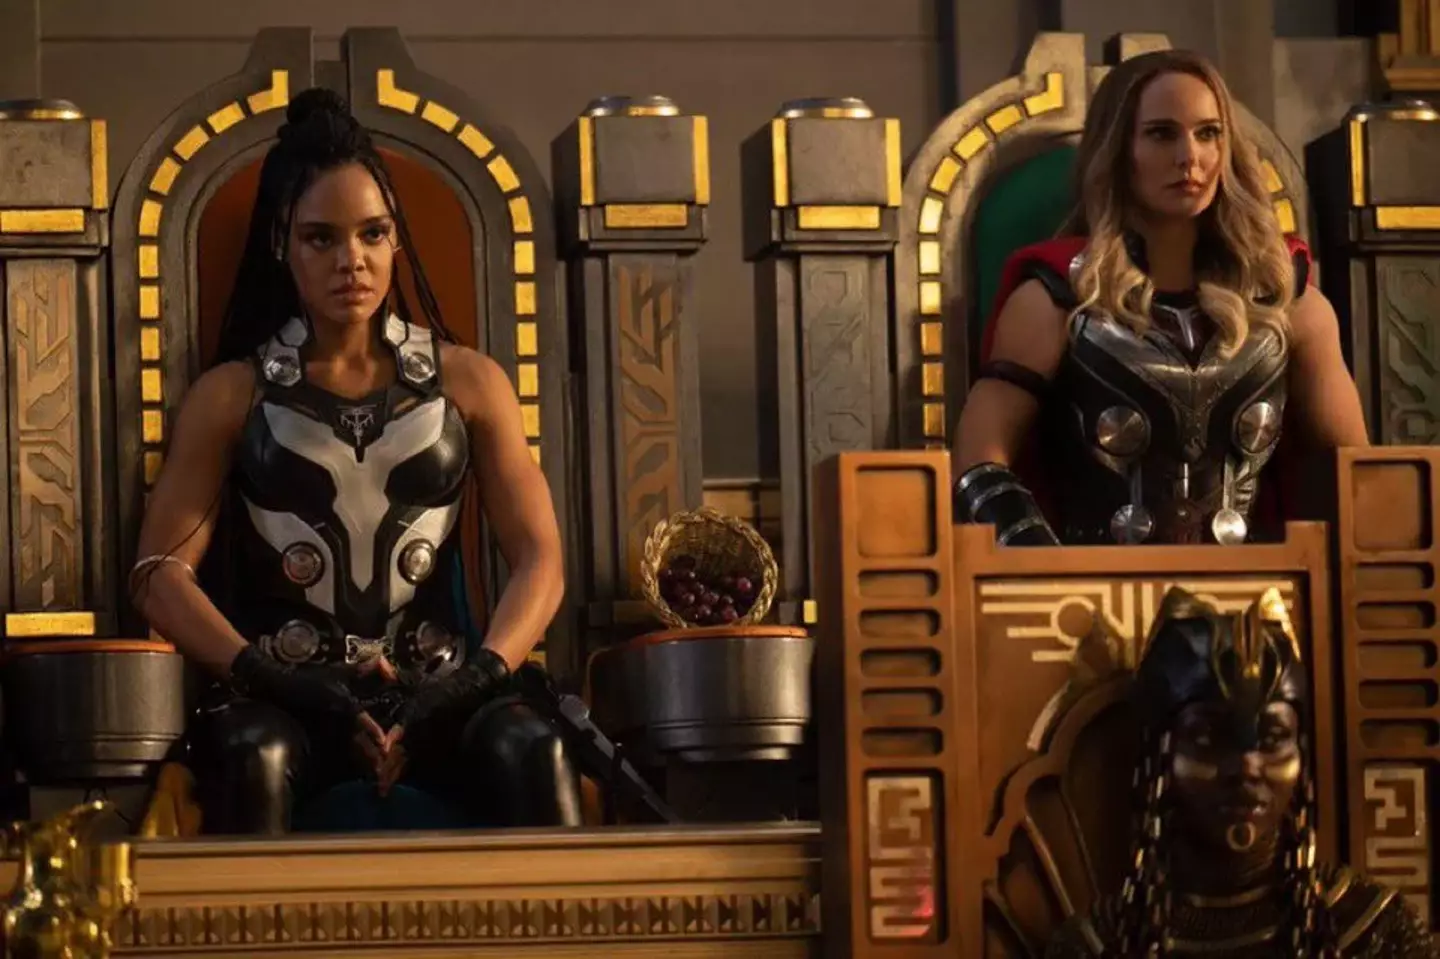 Natalie Portman can be seen looking hench for her role as the Mighty Thor in the latest Marvel film. (